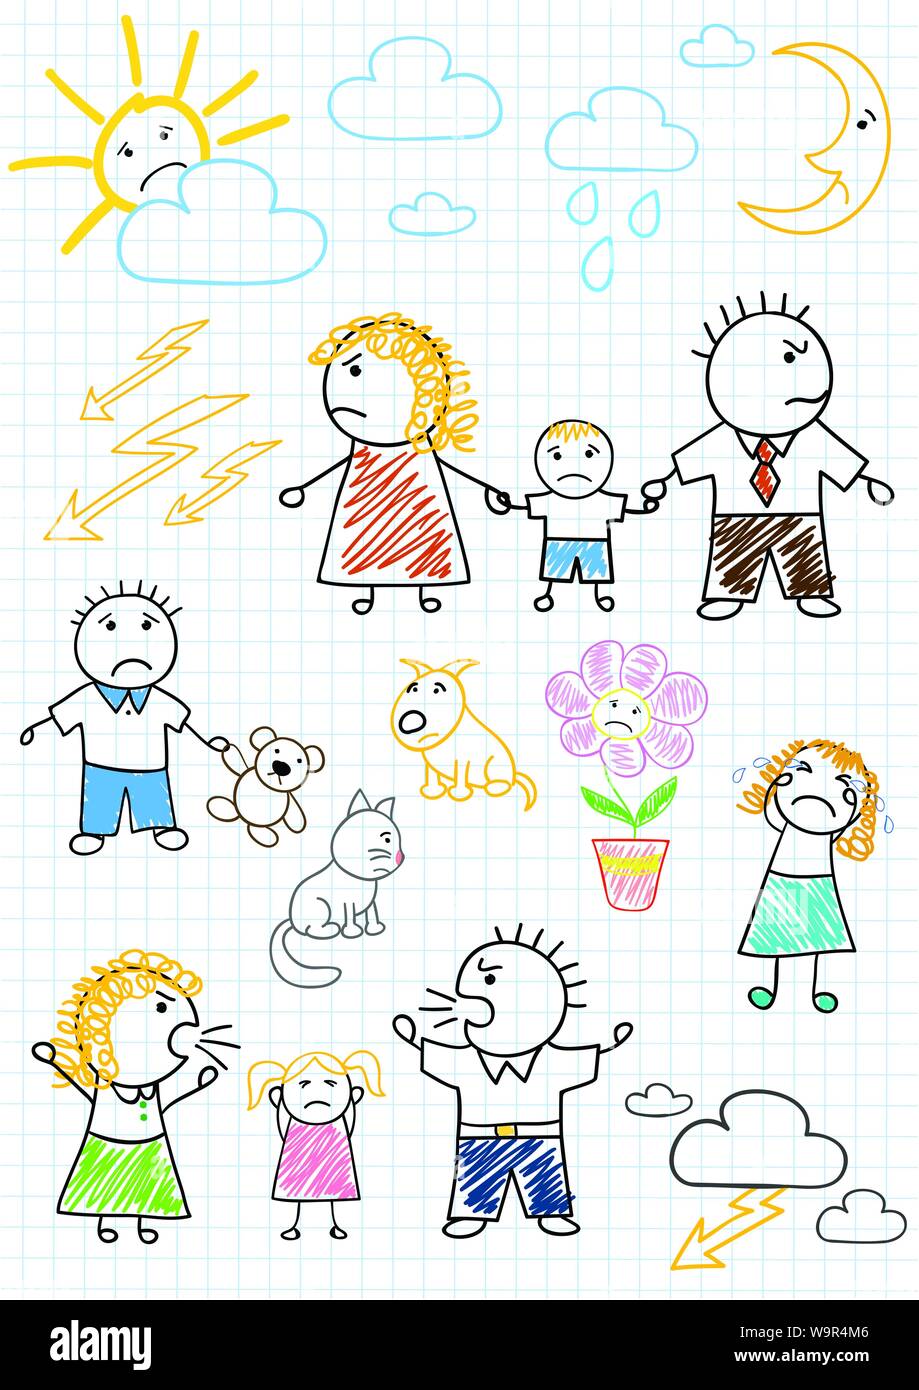 Vector drawings - conflicts within the family, parents quarrel. Sketch on notebook page Stock Vector